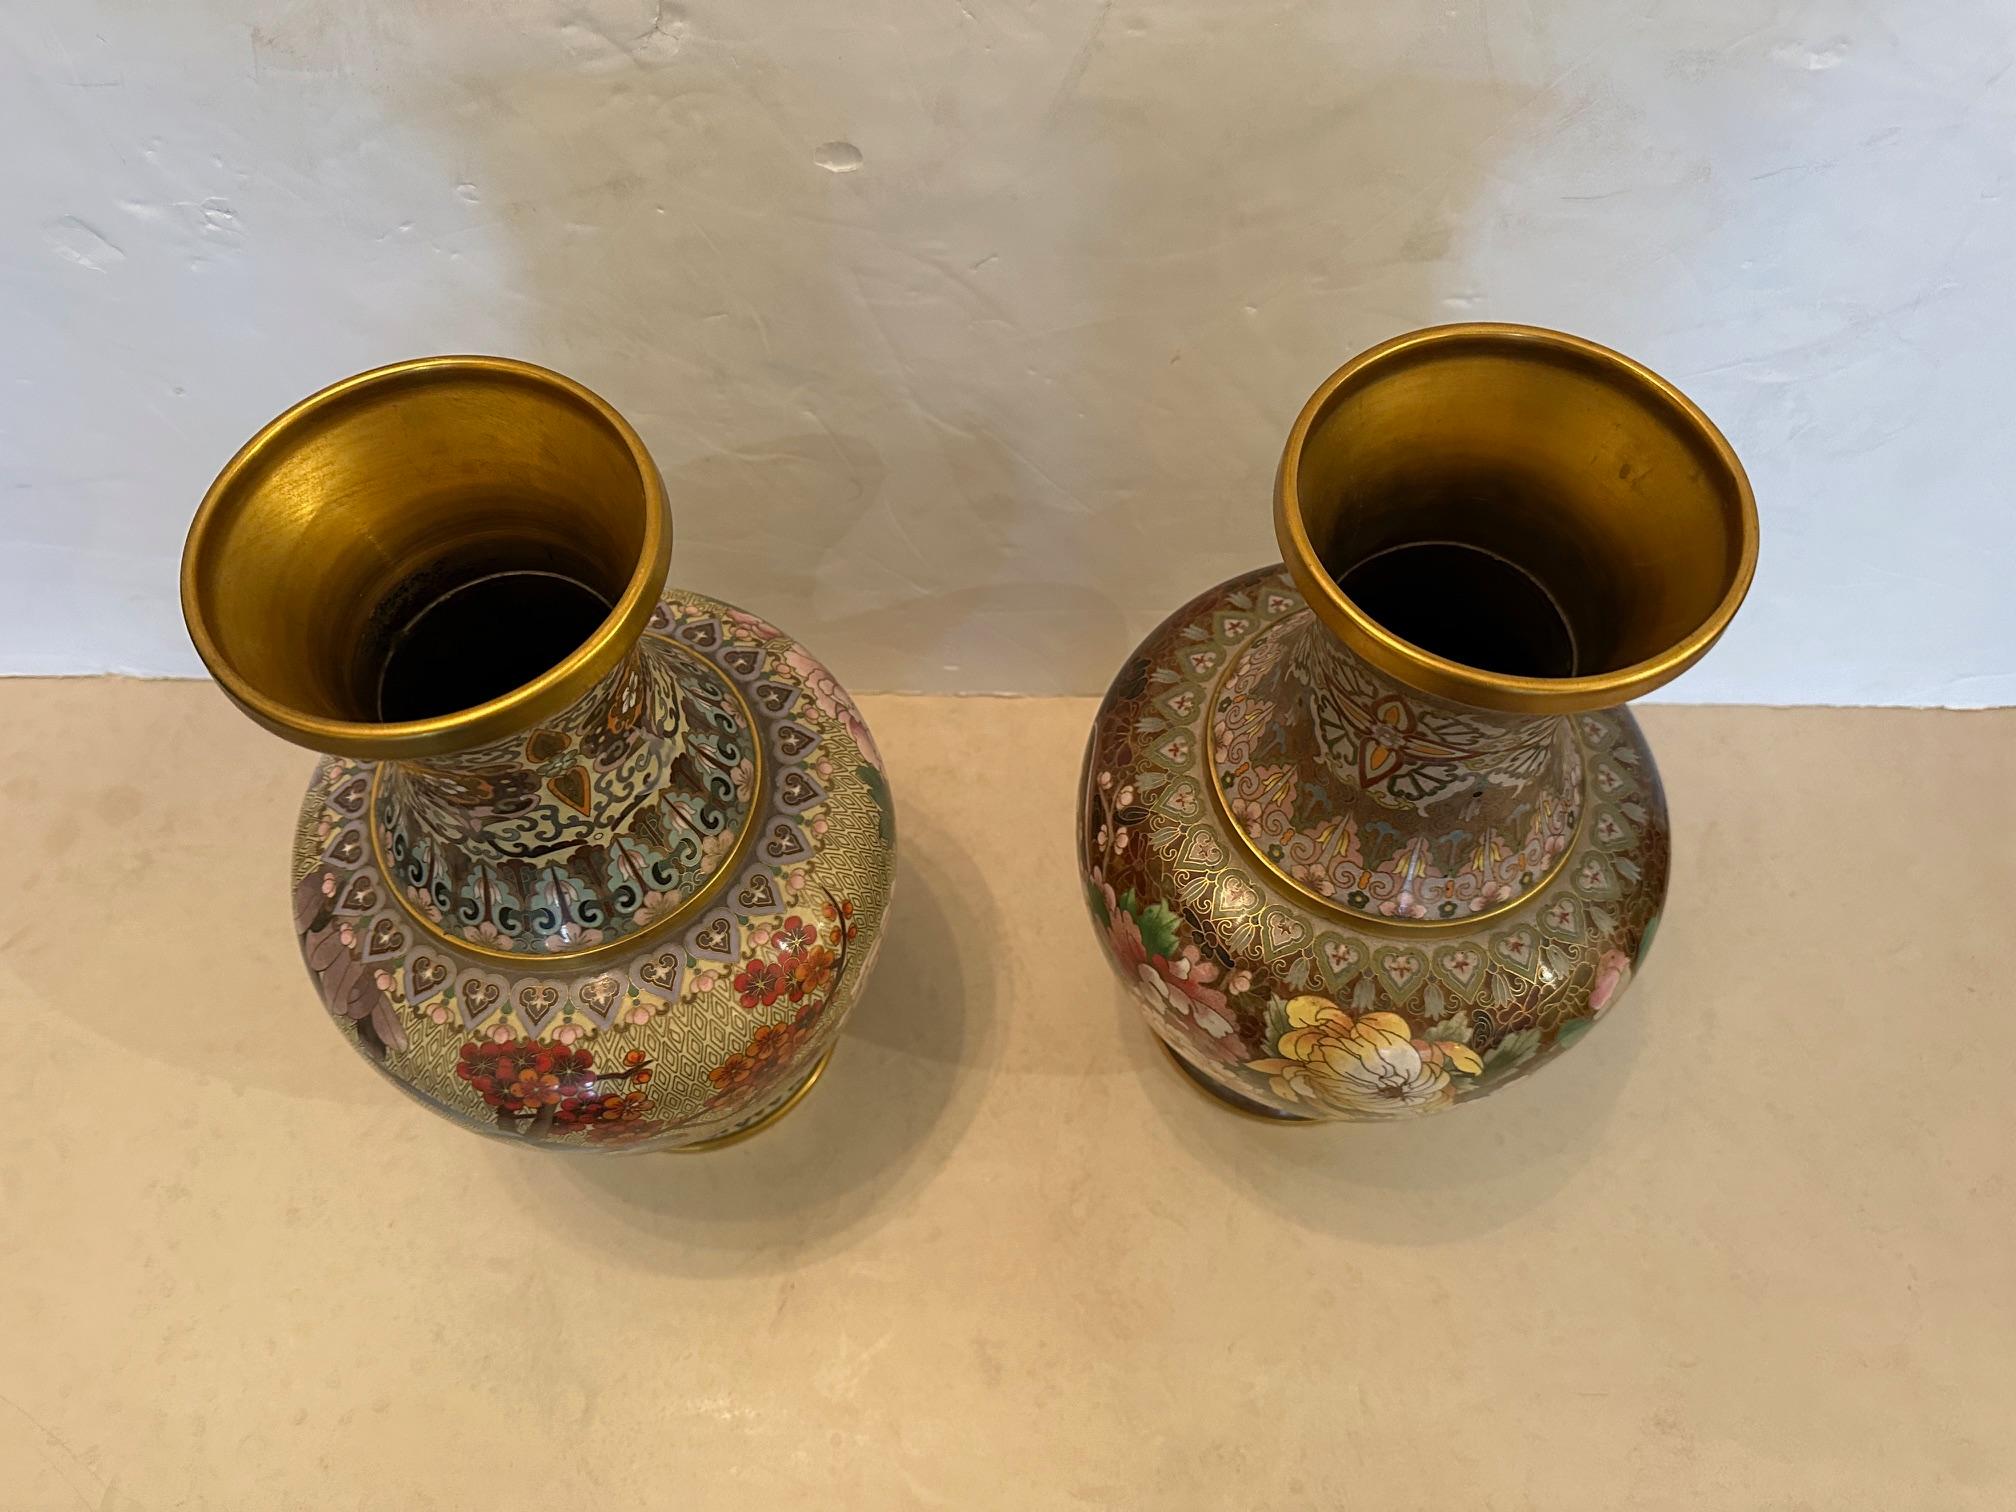 Pair of Exquisite Chinese Gilded Enamel on Bronze Cloissonne Vases For Sale 5